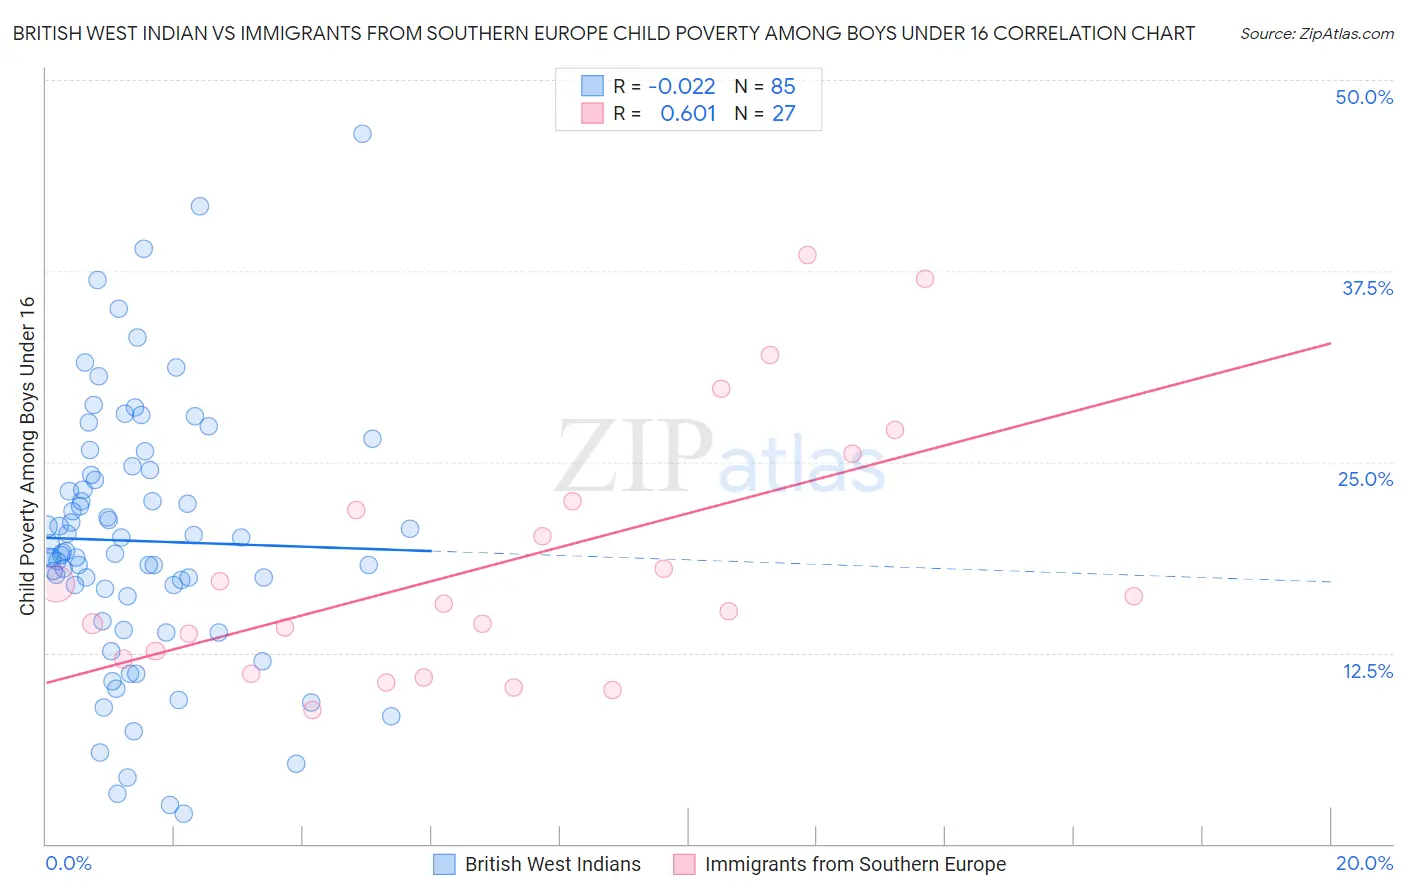 British West Indian vs Immigrants from Southern Europe Child Poverty Among Boys Under 16